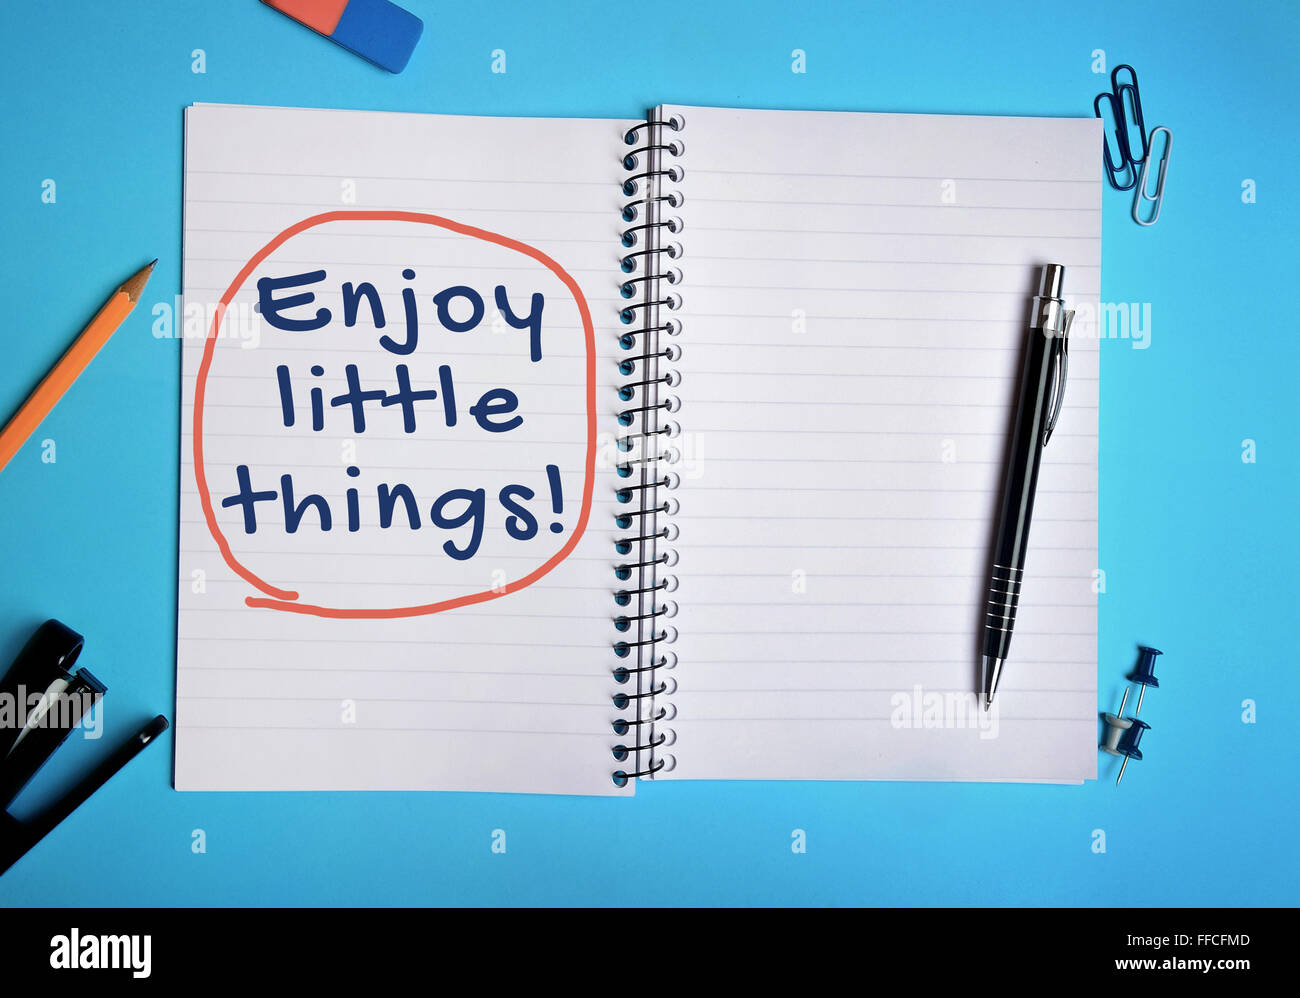 Enjoy the little things word on notebook page Stock Photo